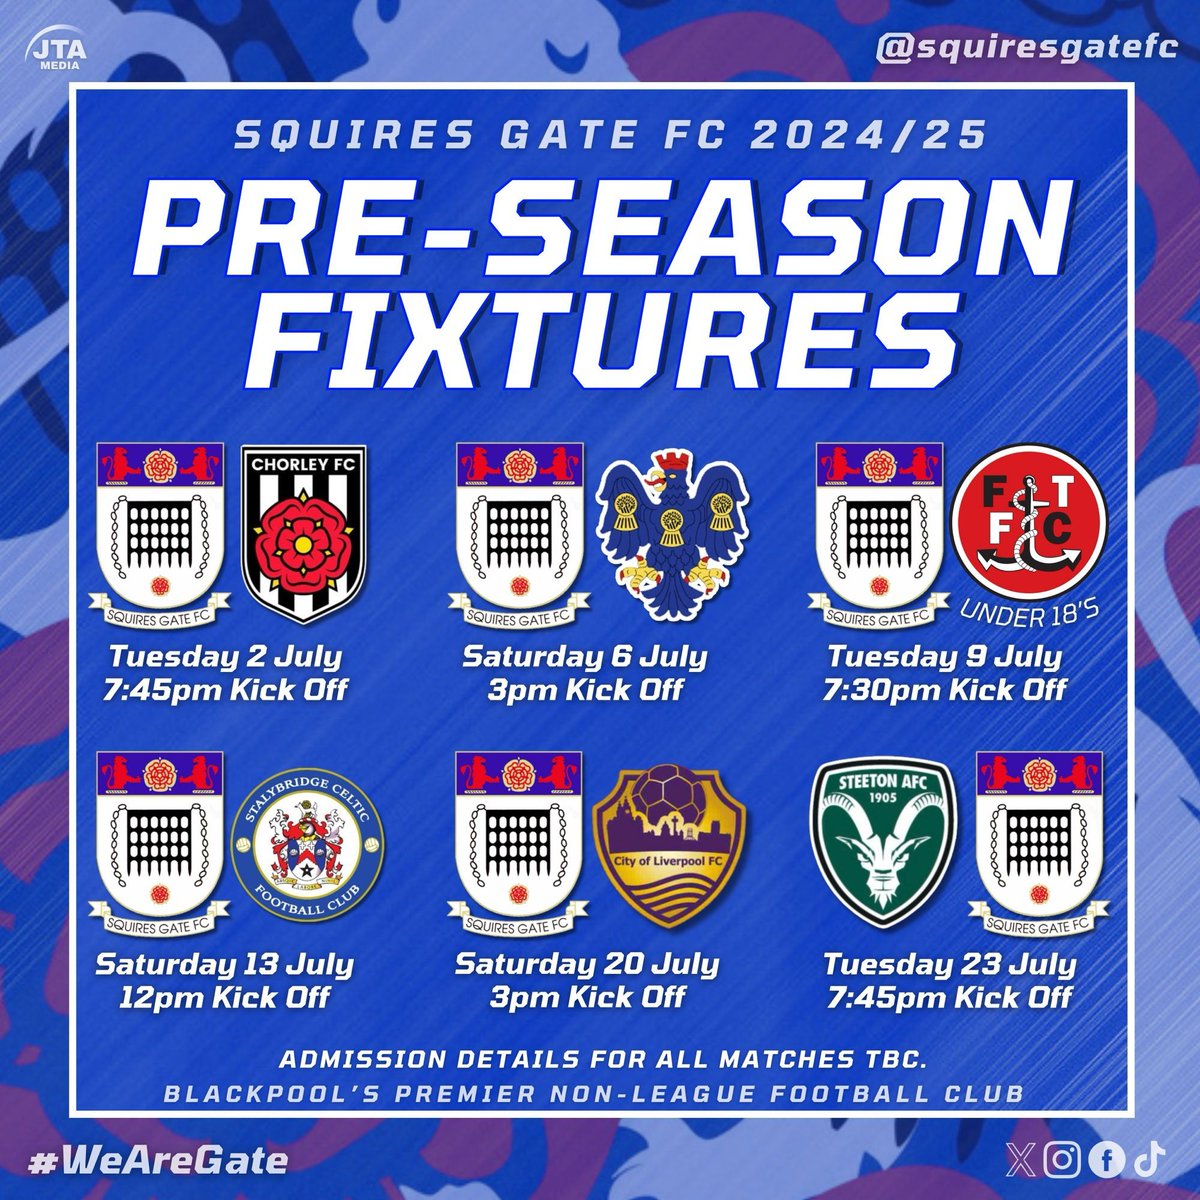 🗓️ 𝙋𝙍𝙀-𝙎𝙀𝘼𝙎𝙊𝙉 𝙁𝙄𝙓𝙏𝙐𝙍𝙀𝙎

🙌 We can now confirm our 2024/25 Pre-Season Fixtures, starting on the 2nd of July as we welcome @chorleyfc to The Brian Addison Stadium!👀 

ℹ️ More details on the fixtures to come in due course.

🔷 #WeAreGate | @JTA__Media